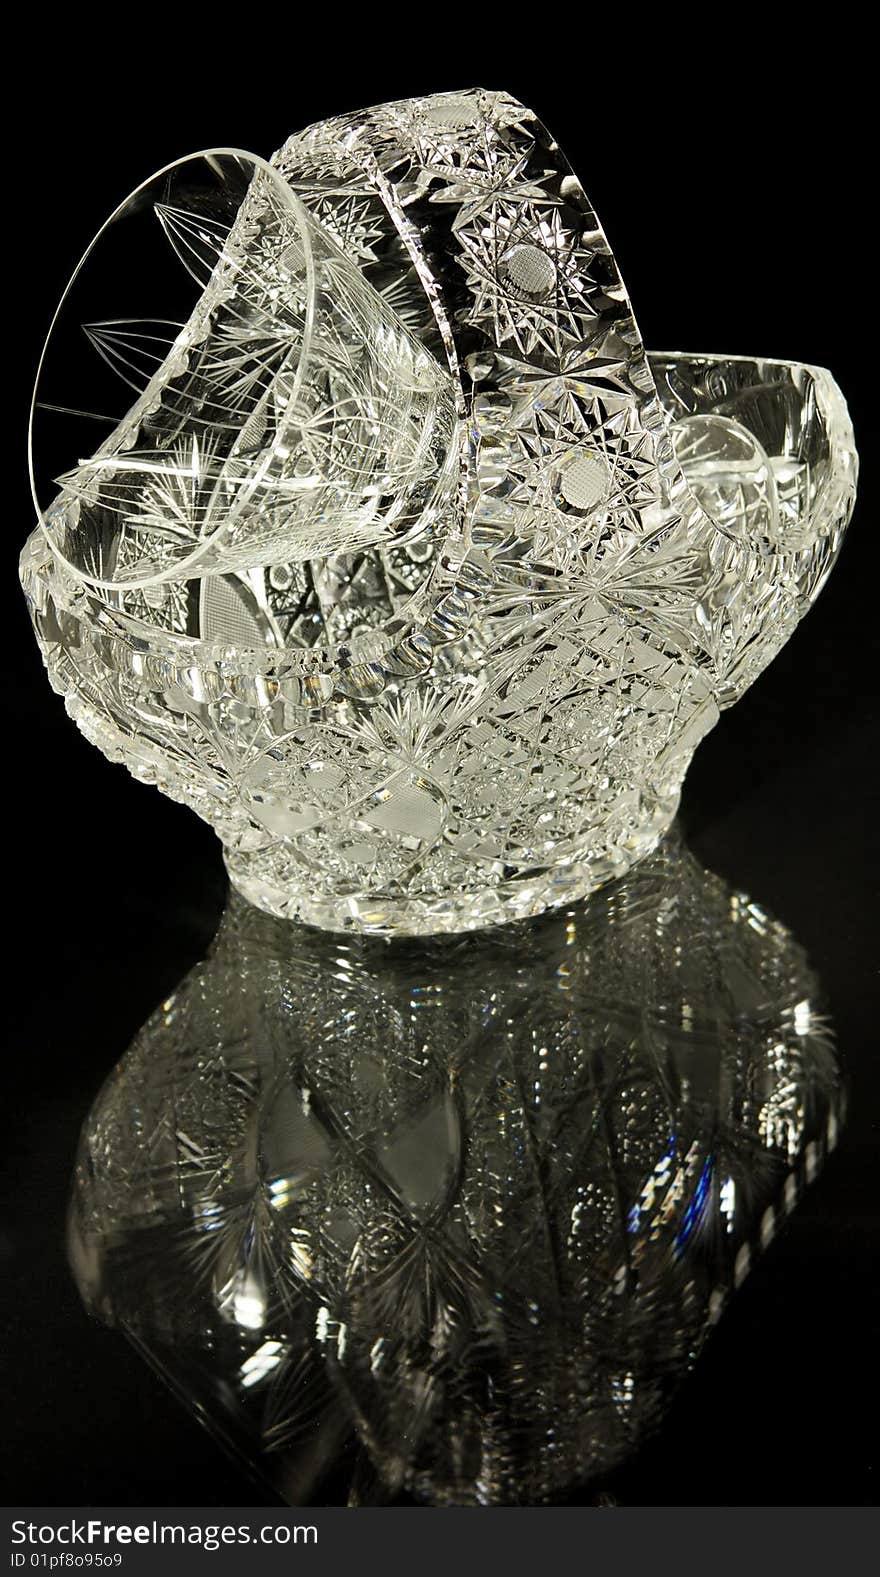 Wine glass in a crystal basket